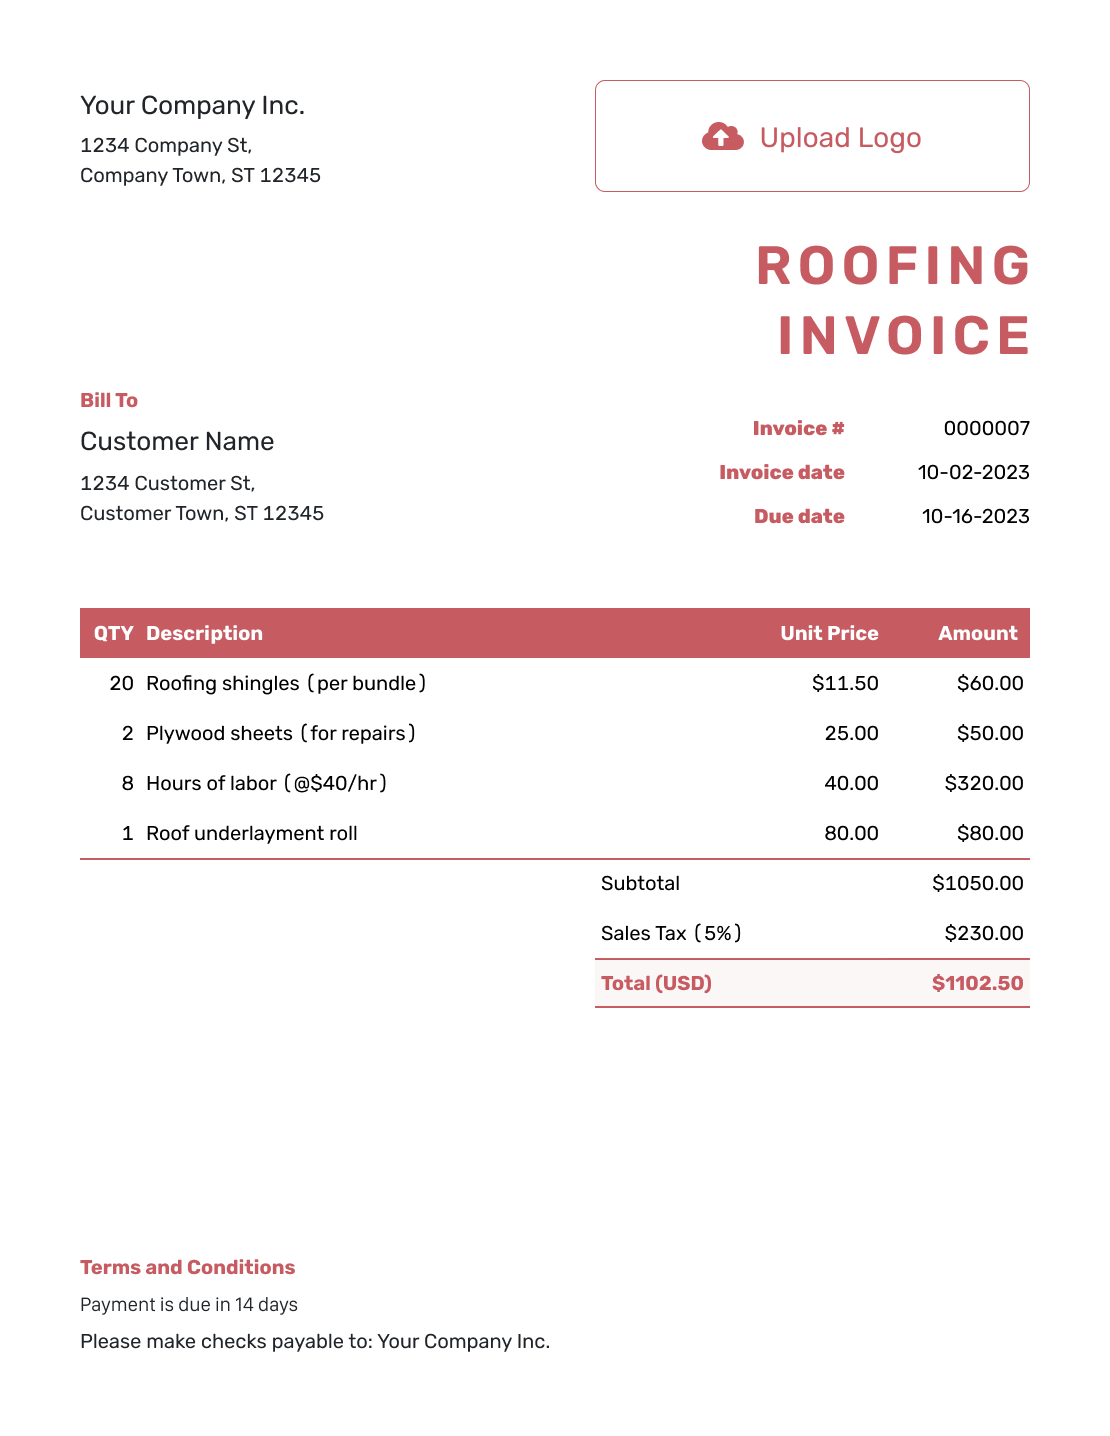 Itemized Roofing Invoice Template